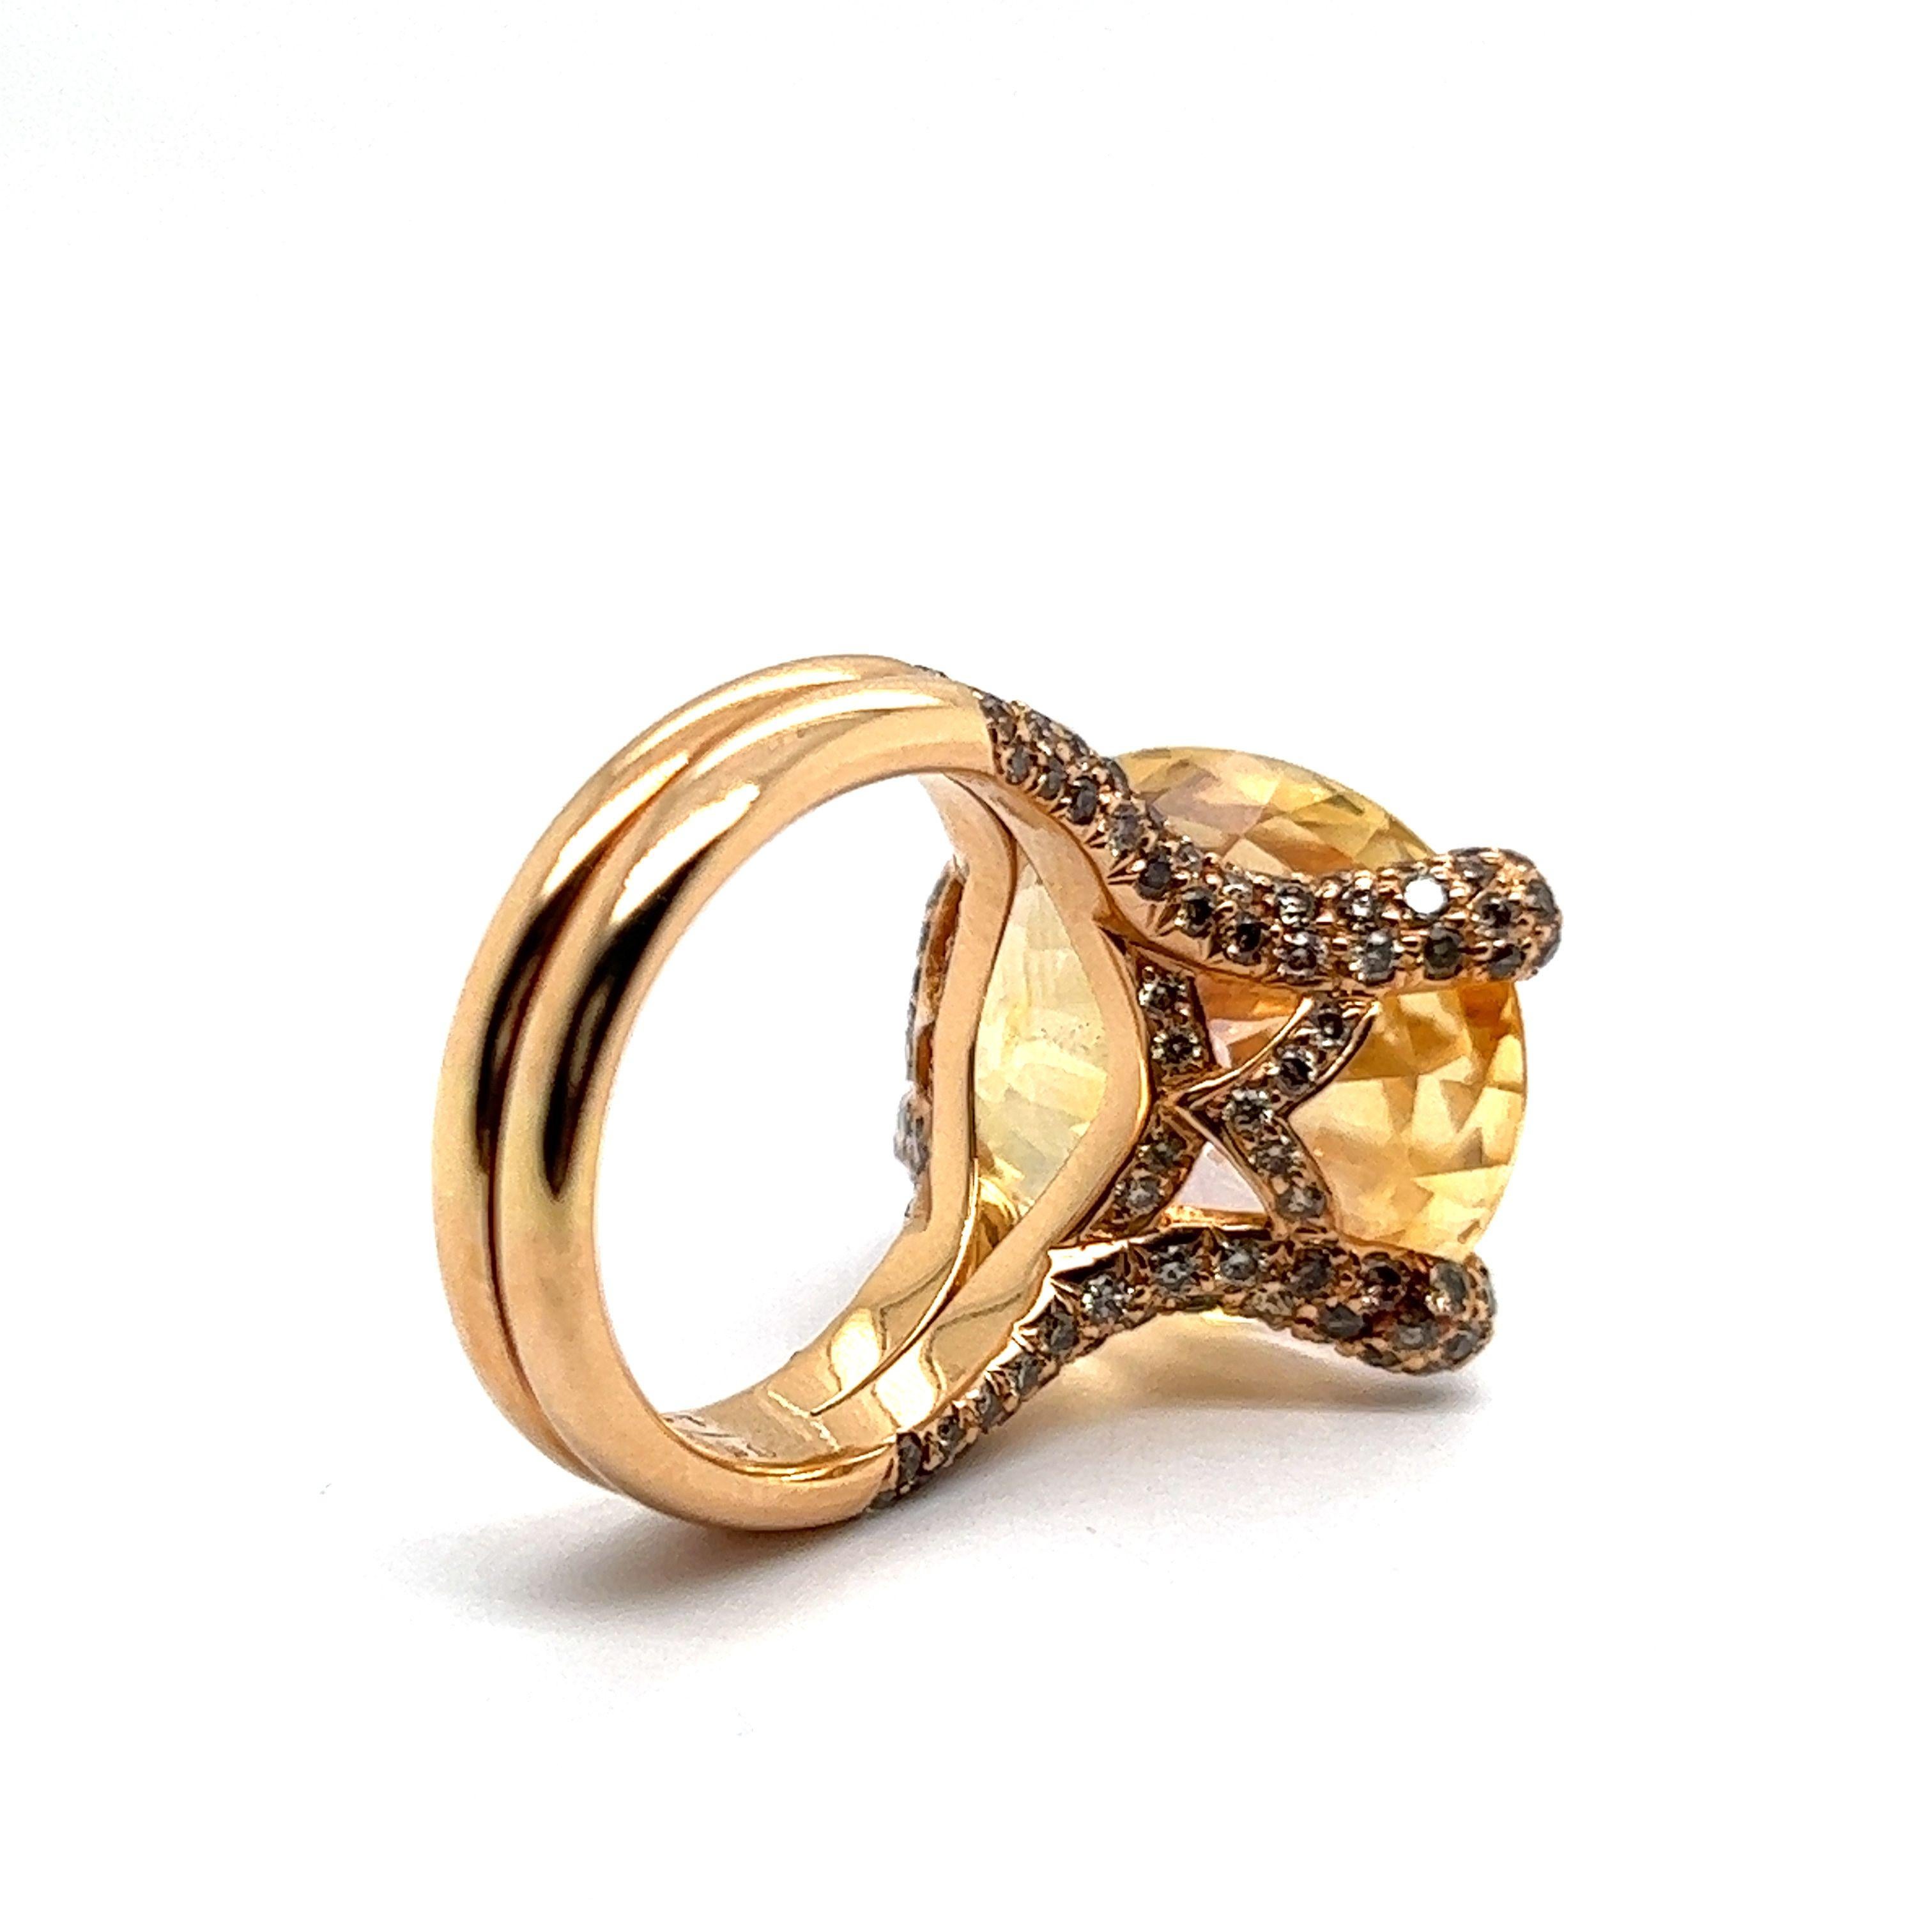 Exceptional Yellow Sapphire and Diamond Ring in 18 Karat Yellow Gold 6